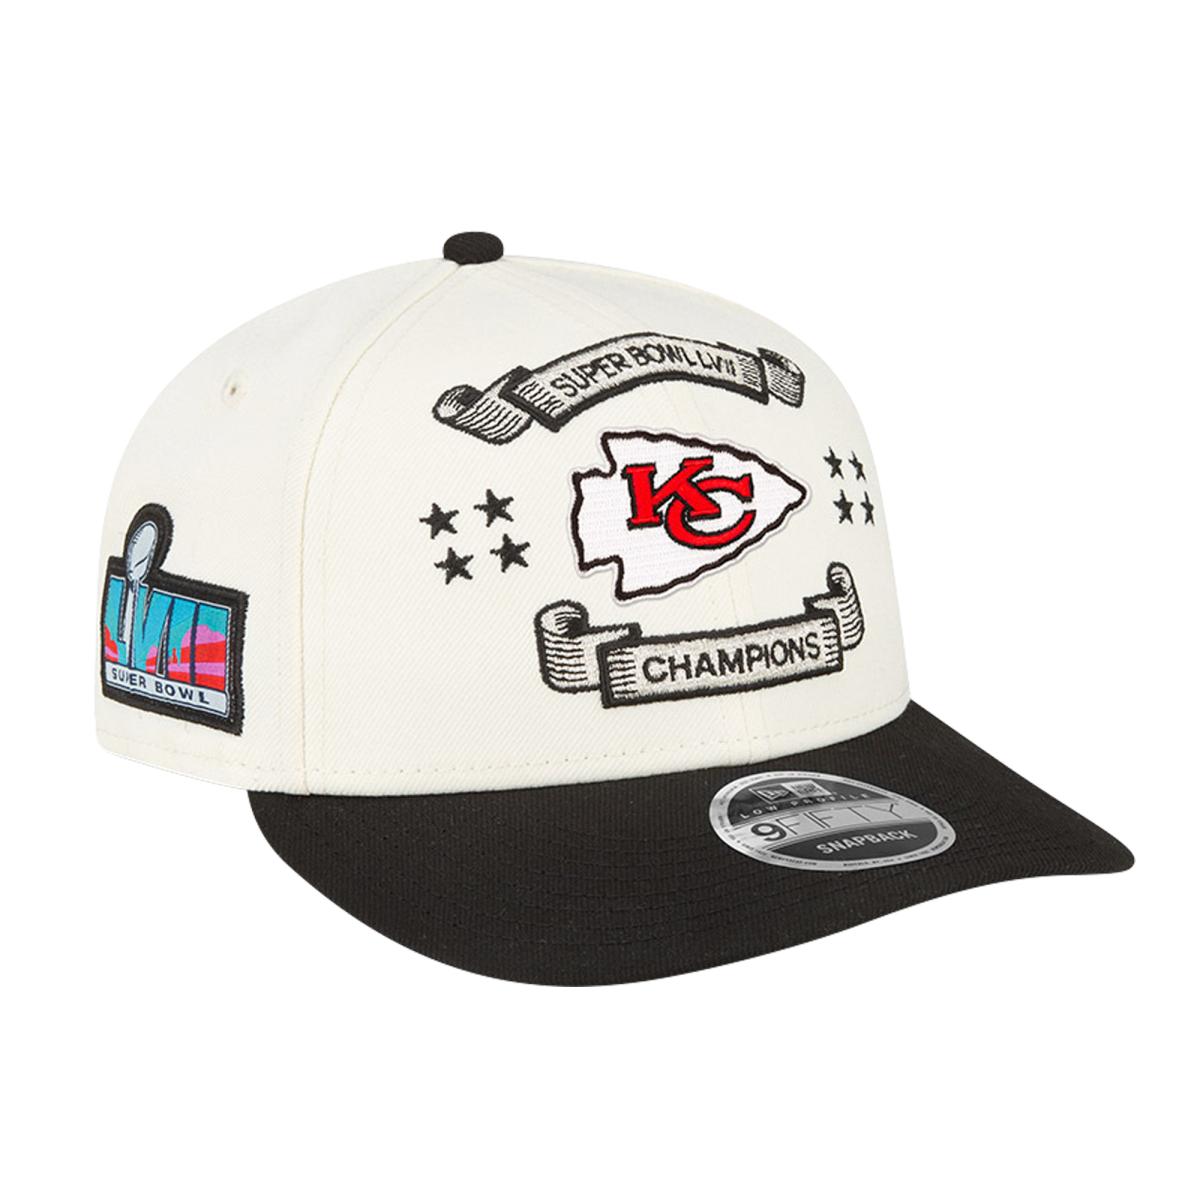 Kansas City Chiefs Trophy Collection Hat - $34.99